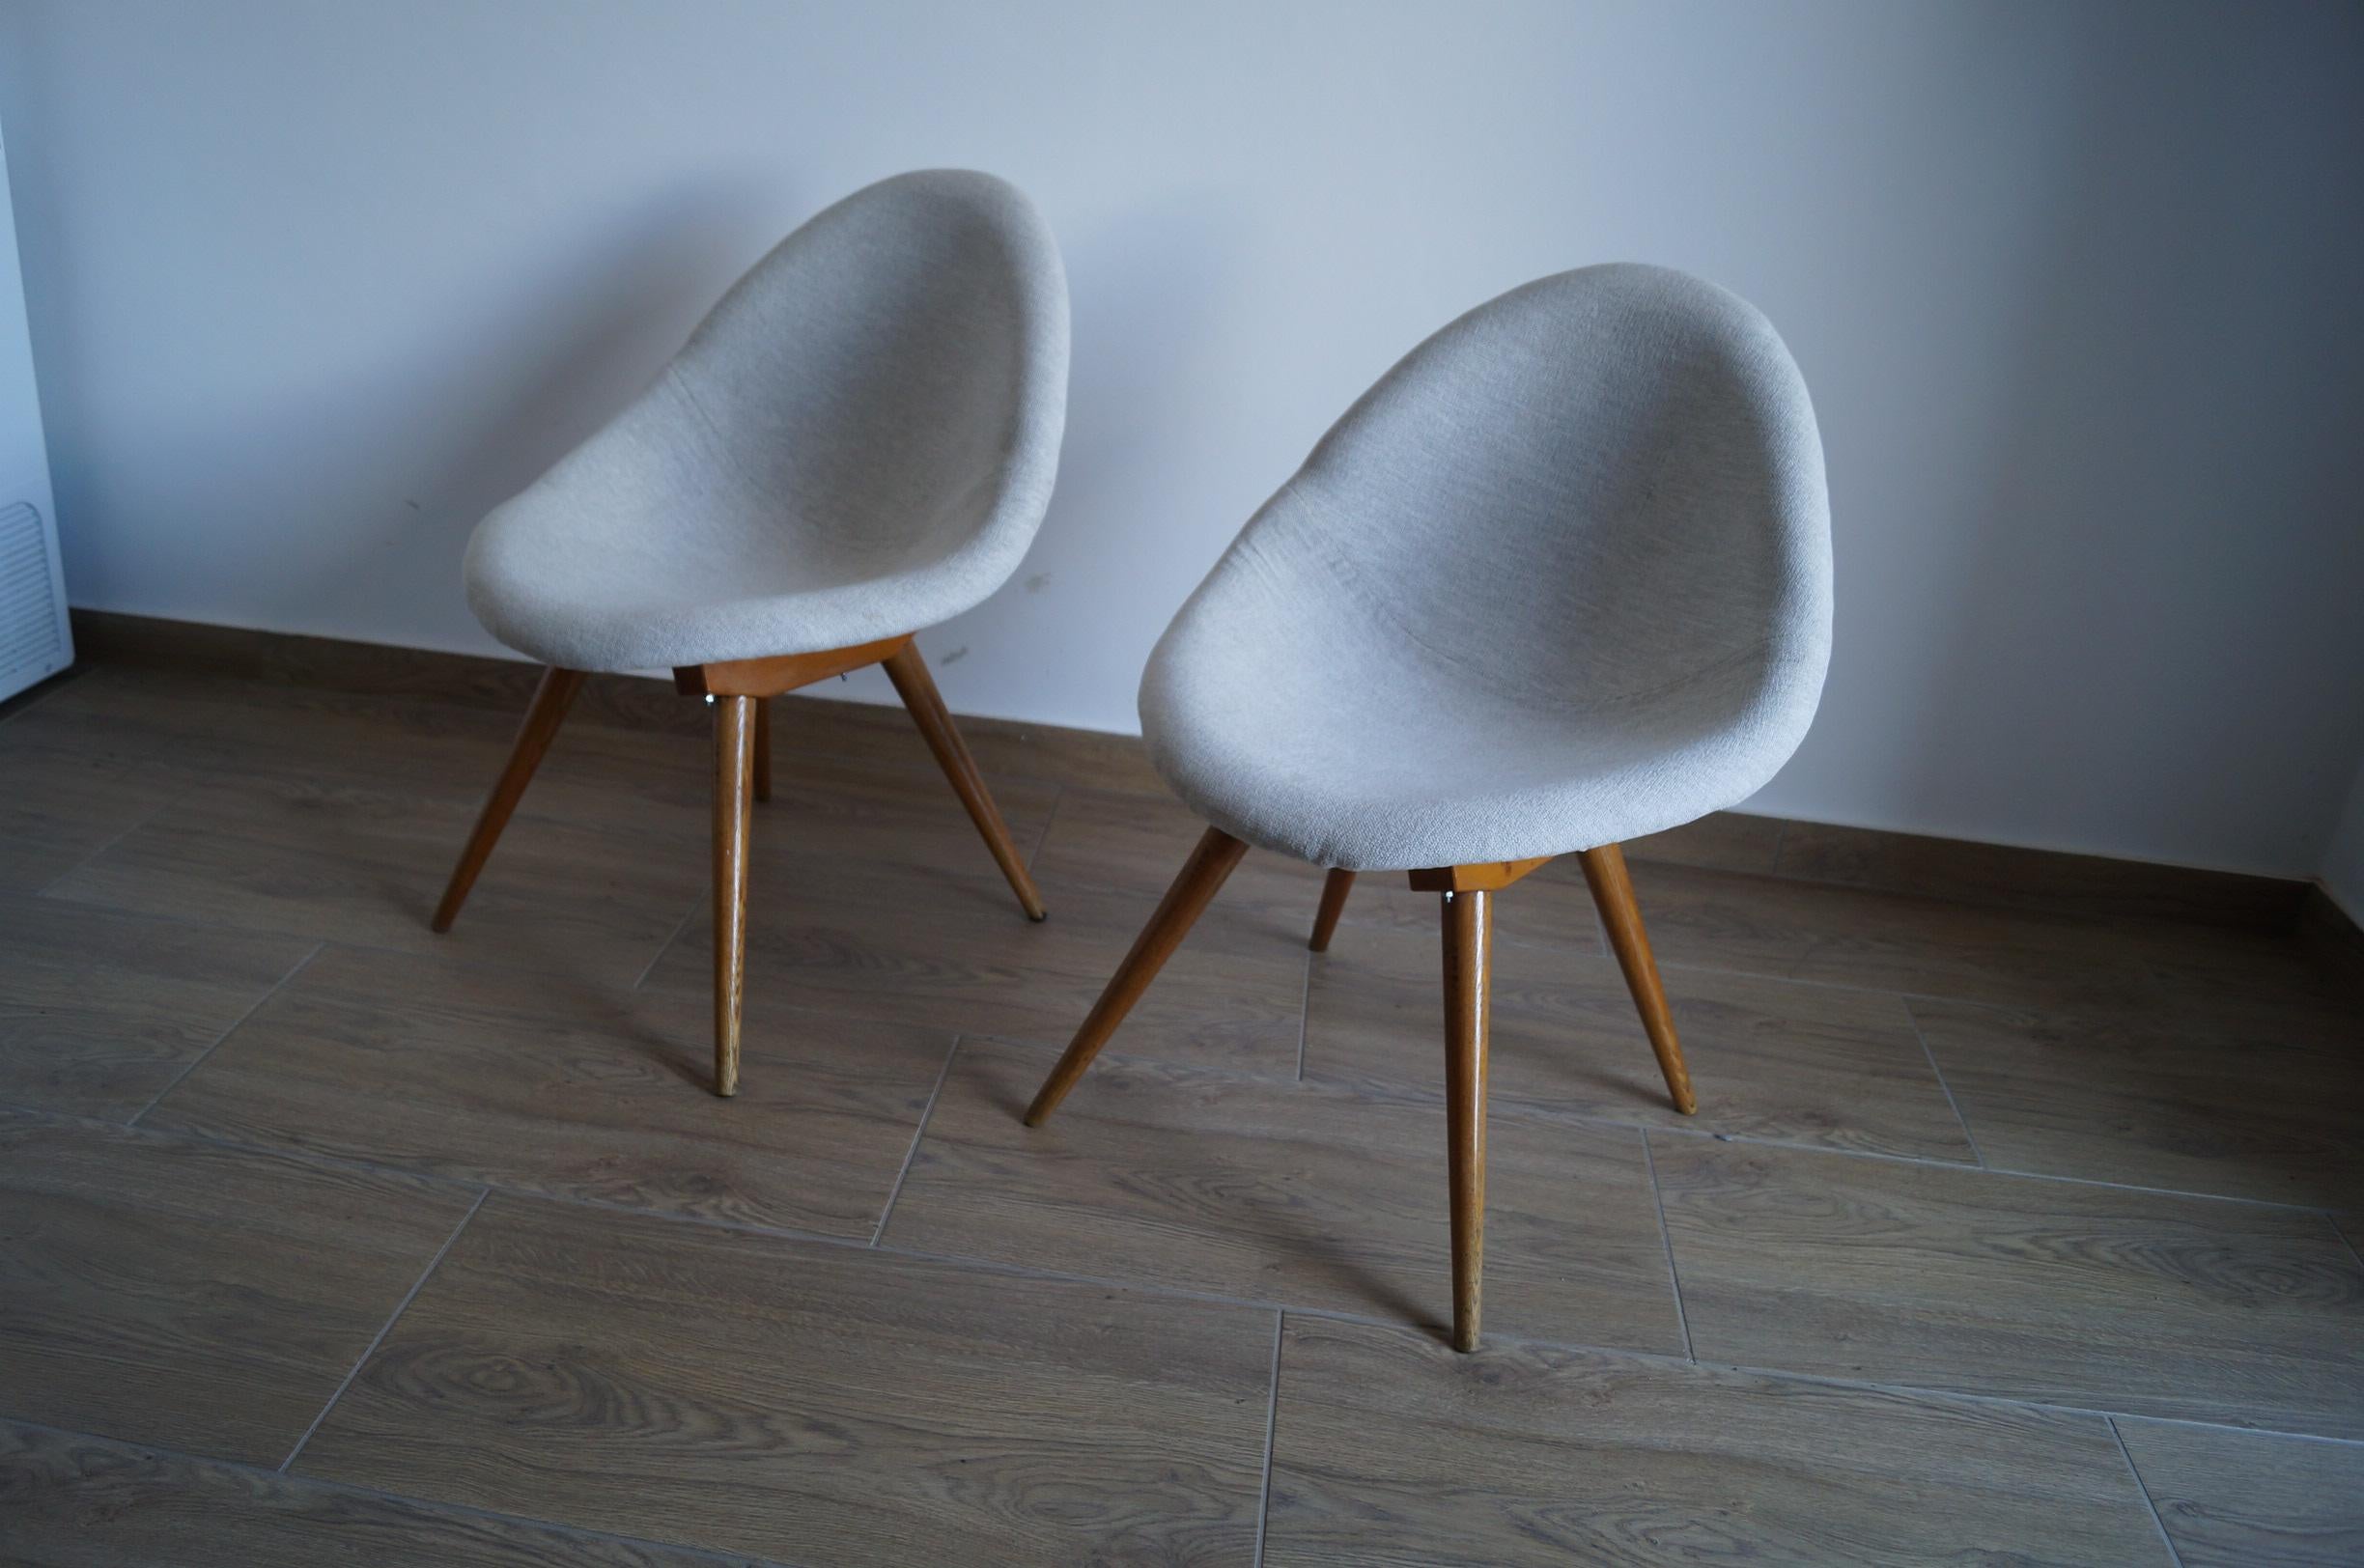 Two Art Deco Armchair Shell from 1950 In Good Condition For Sale In Kraków, Małopolska